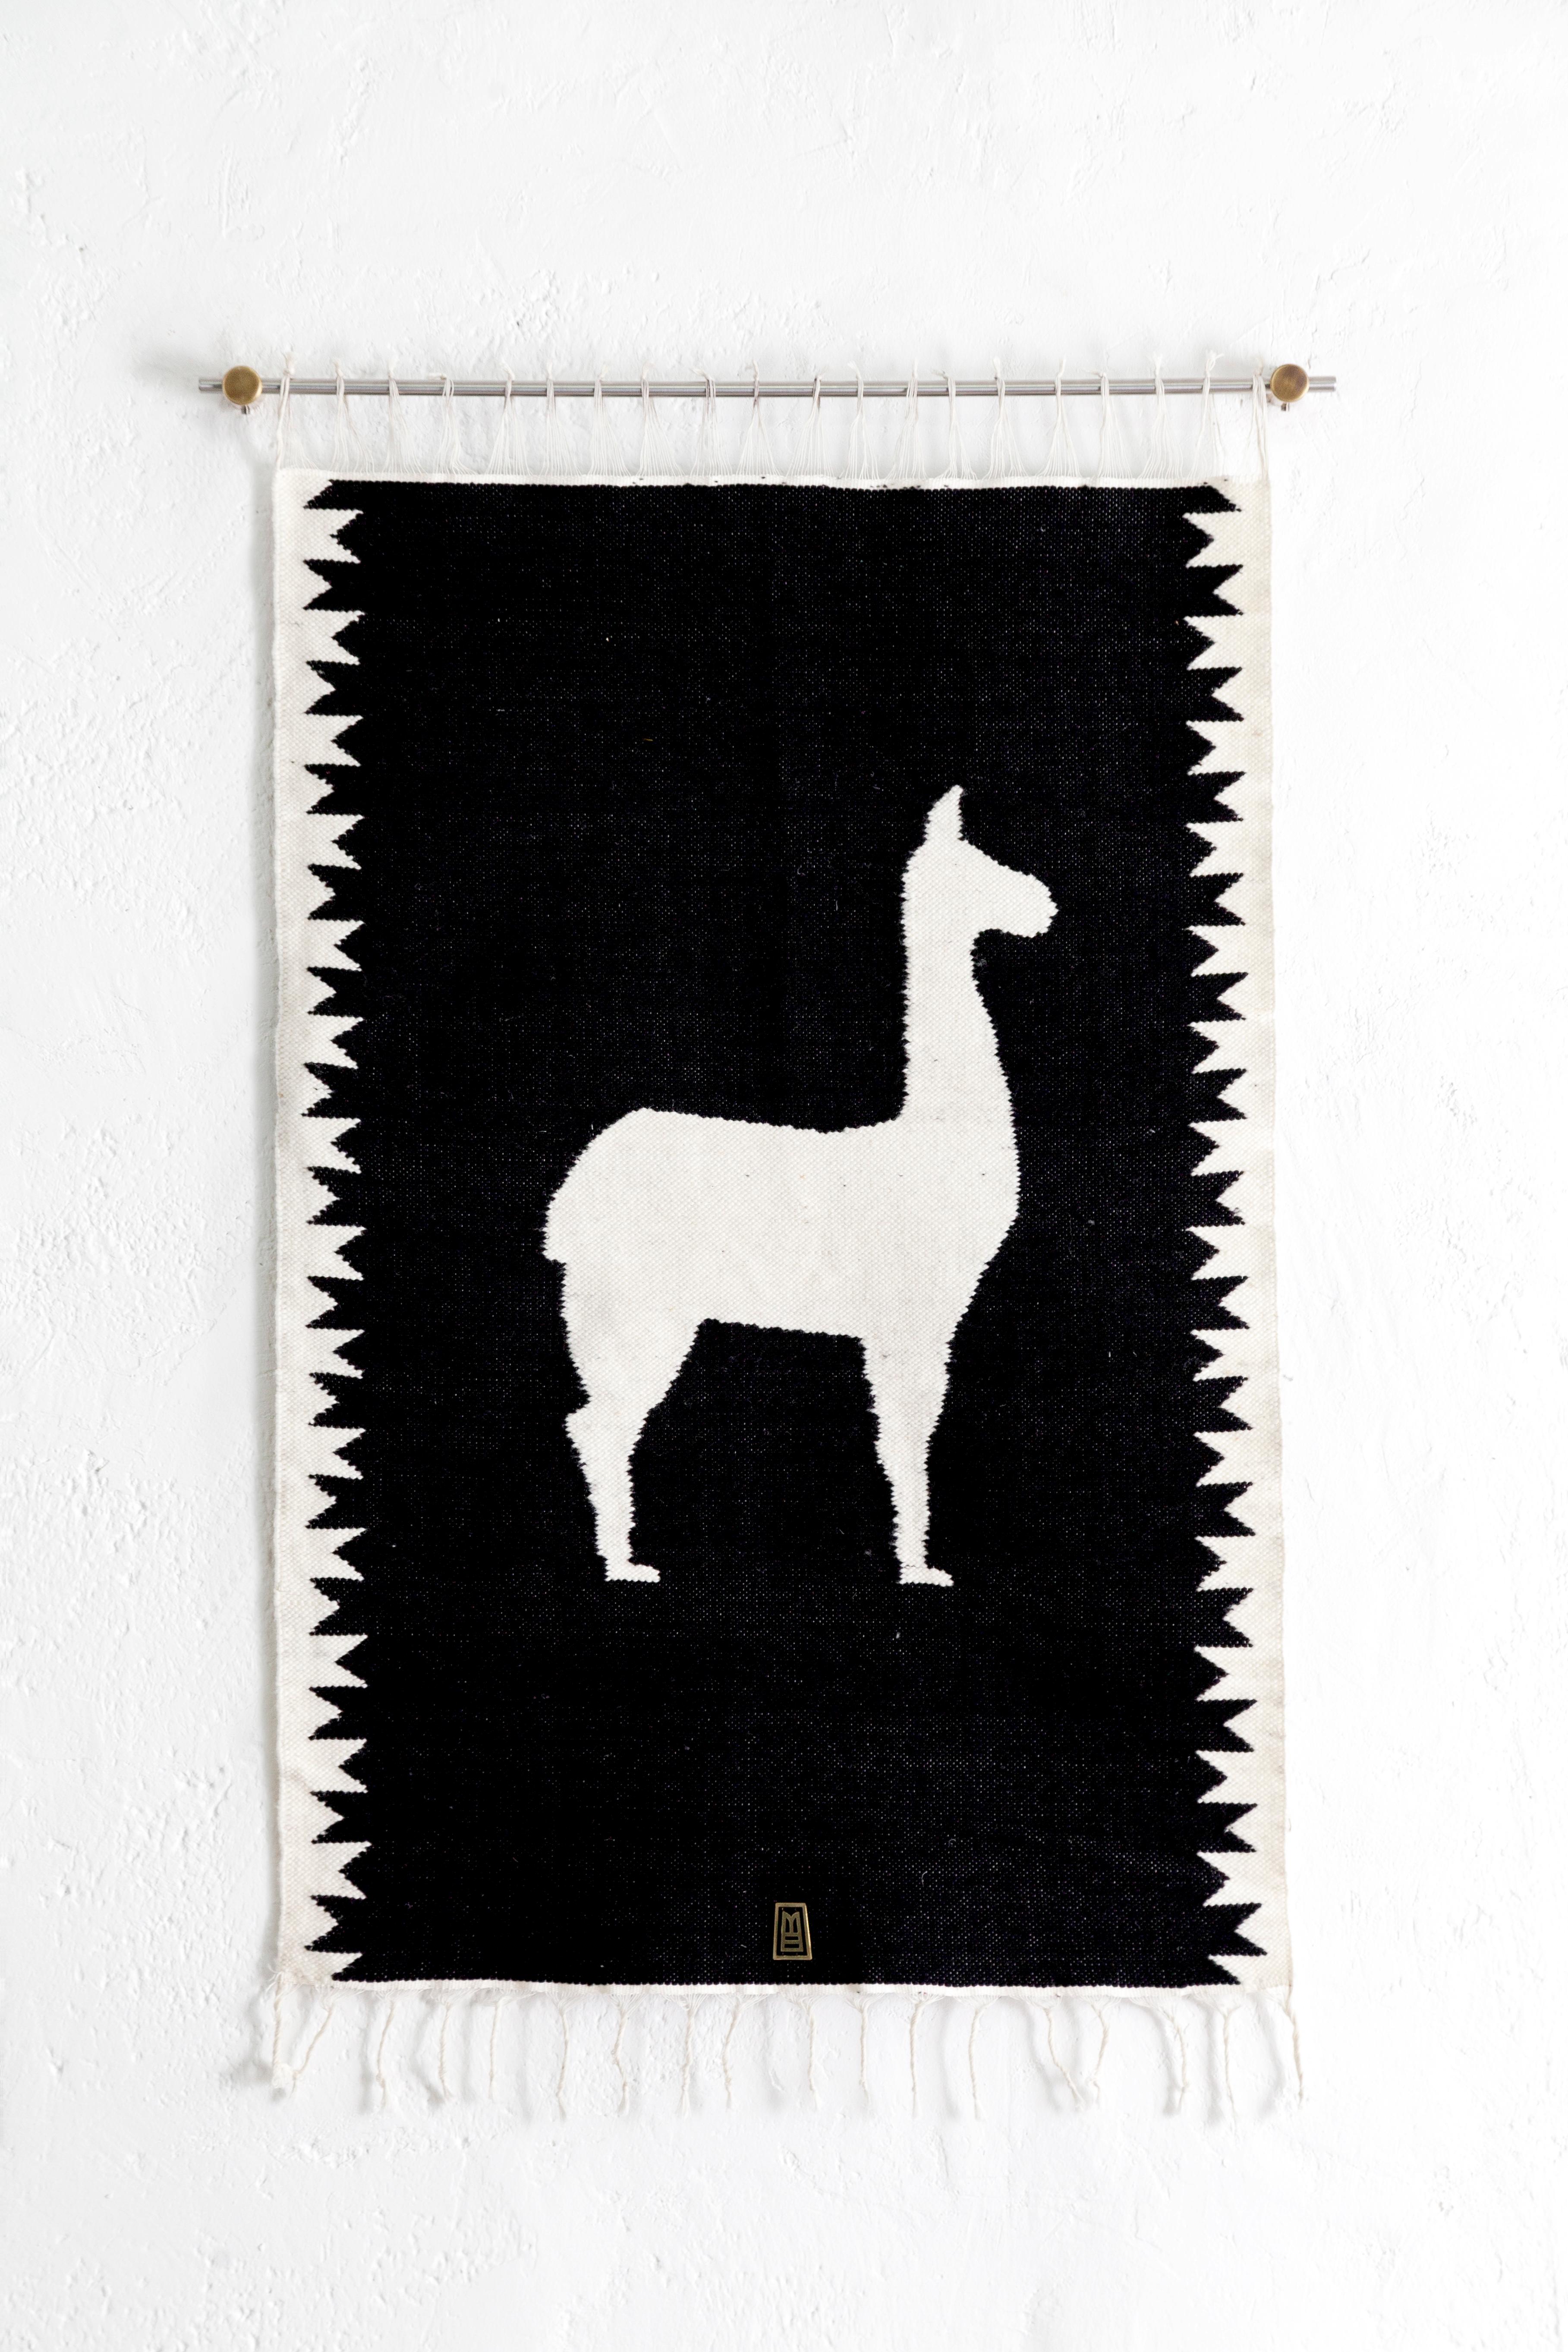 Handwoven sheep wool tapestry with wall-mounting lathed bronze bases, and stainless steel rod.

Capturing the essence of the Andes, these pieces are created using ancient weaving techniques yet loomed through an innovative approach of traditional